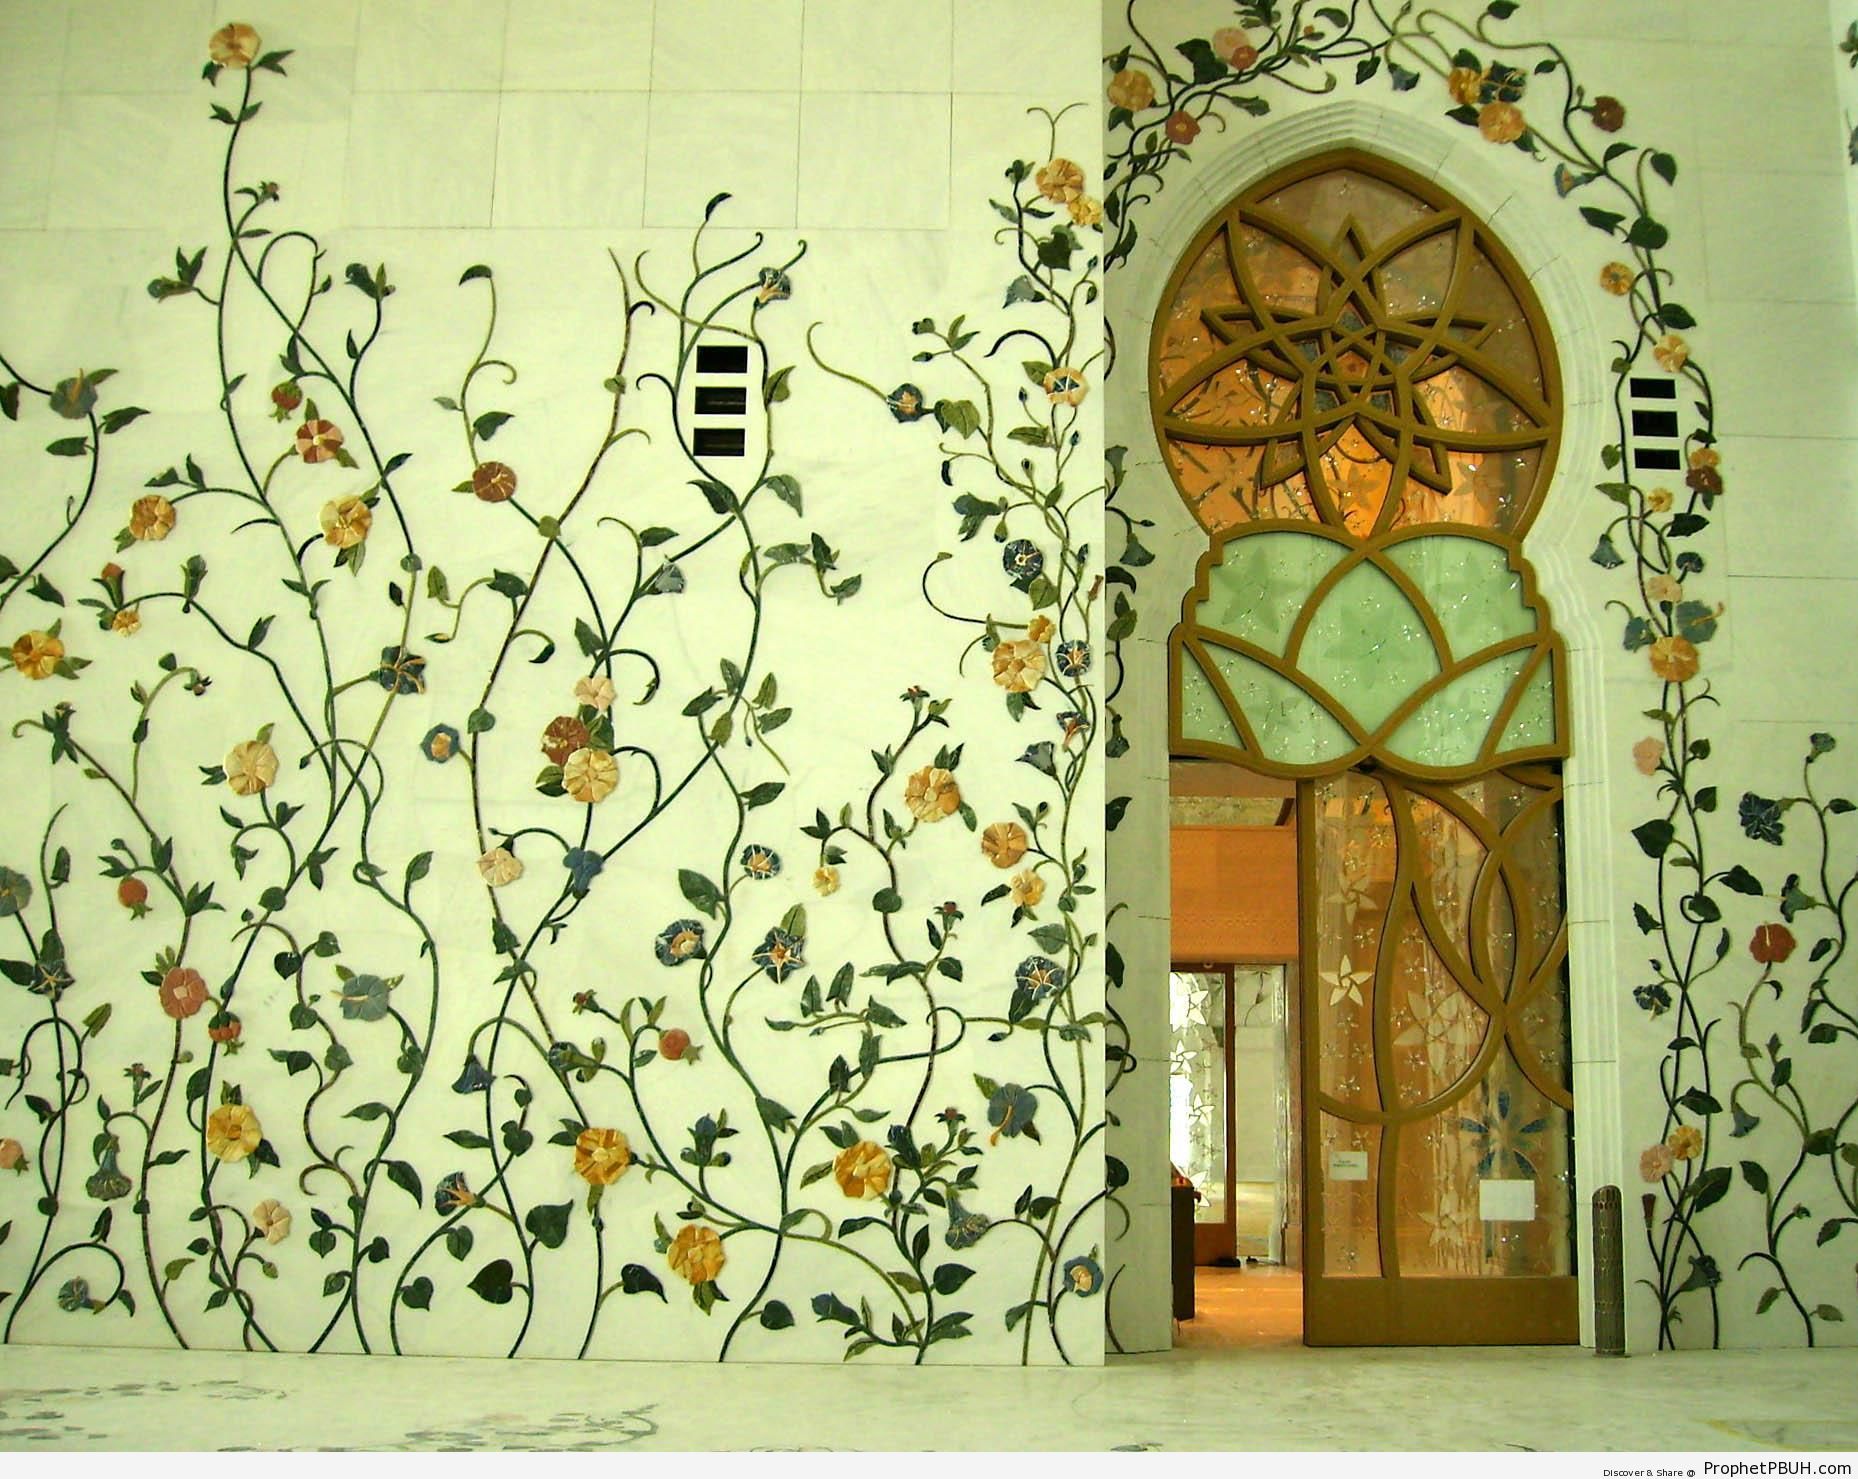 Doorway and Ornamented Wall at Abu Dhabi-s Grand Mosque - Abu Dhabi, United Arab Emirates -Picture